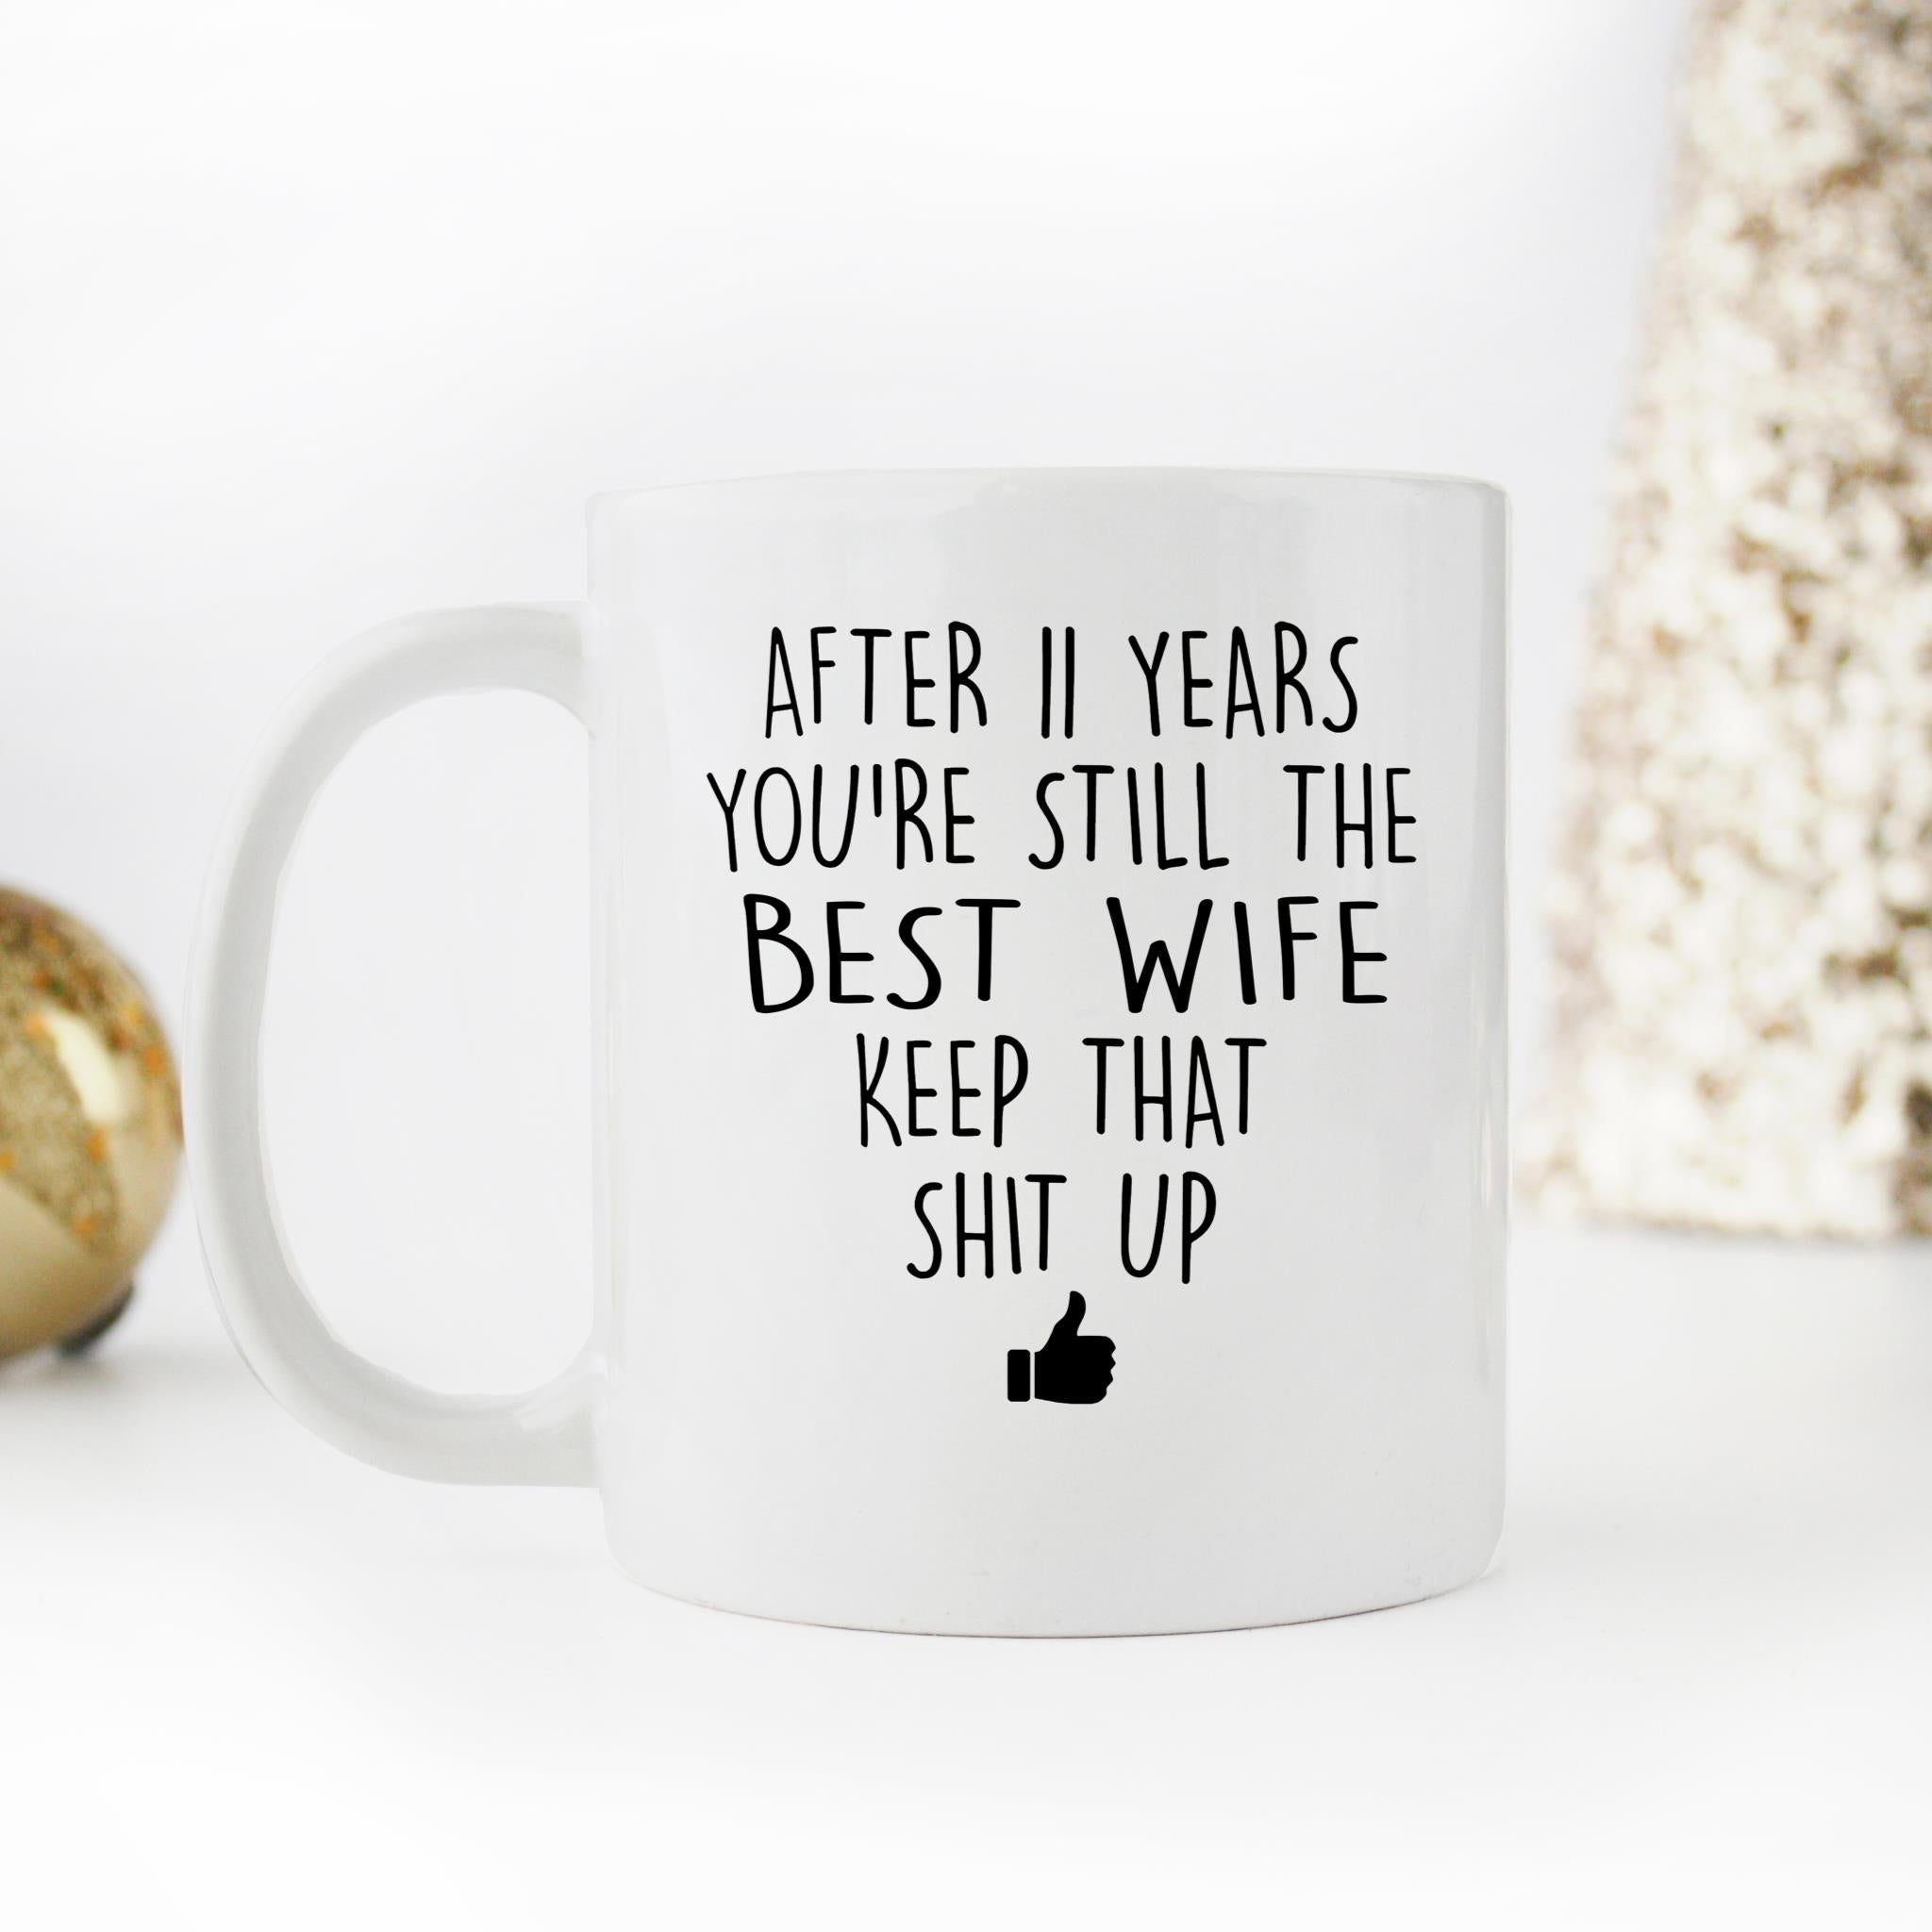 Skitongifts Funny Ceramic Novelty Coffee Mug After Custom Years You're Still The Best Wife Keep That Shit Up 0KyokIc